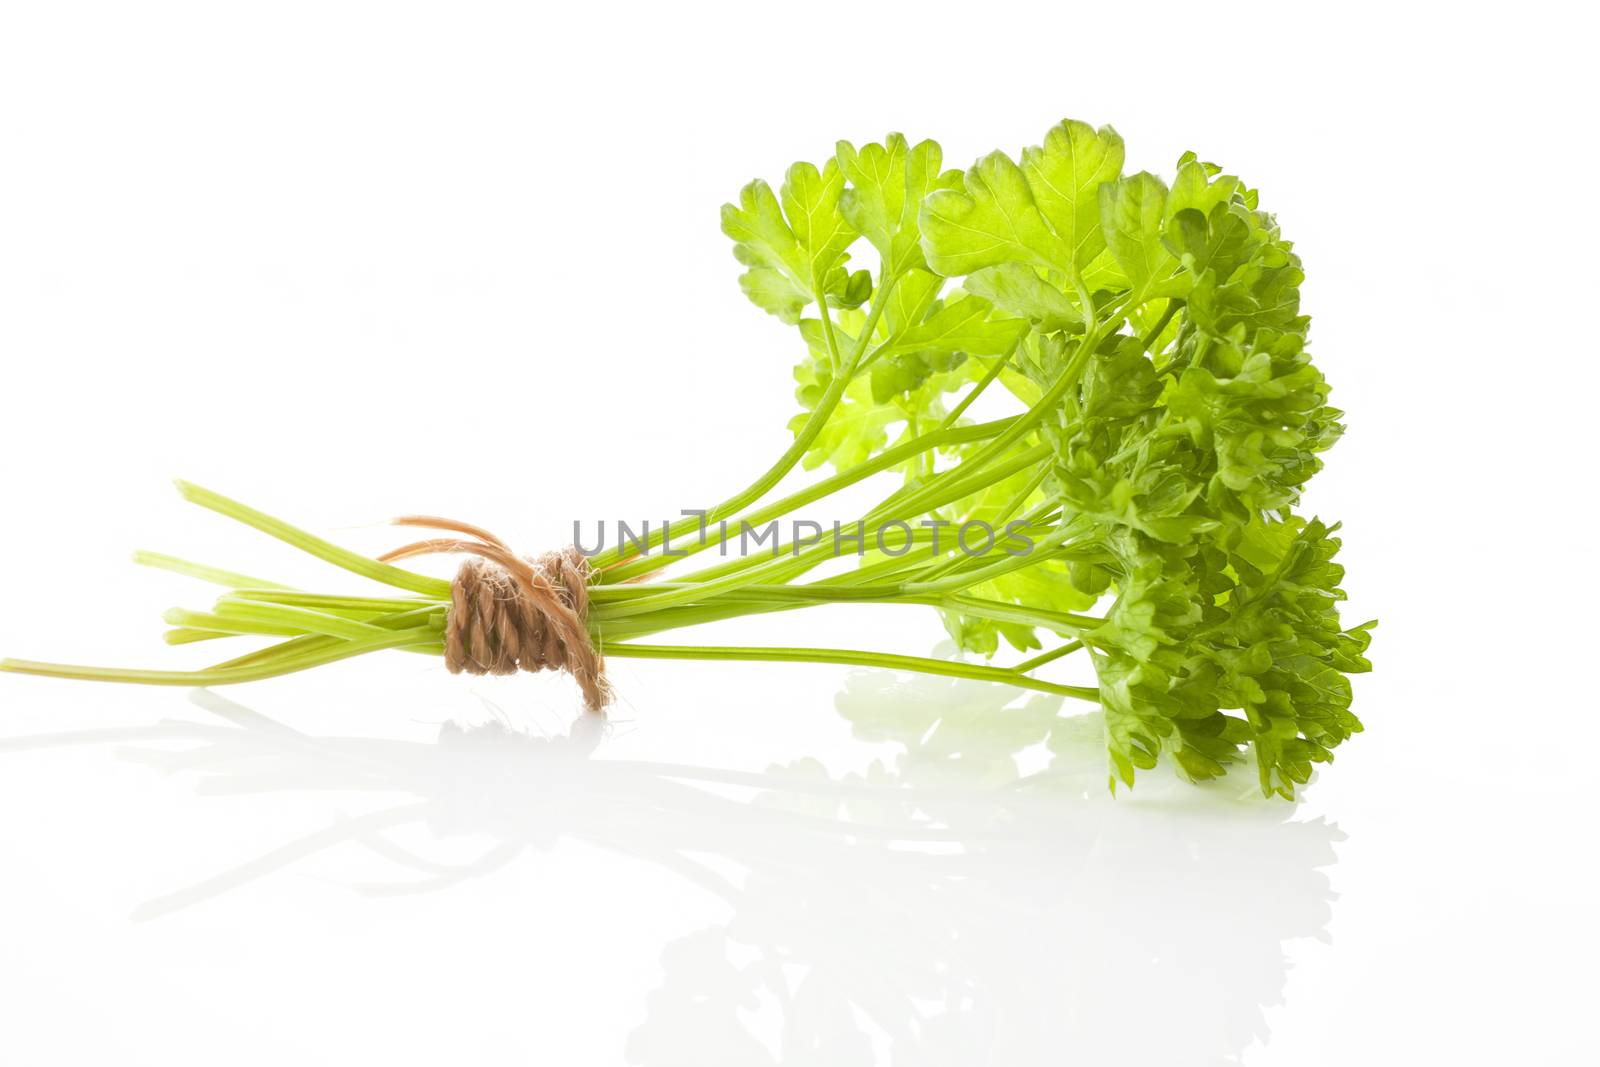 Curly parsley bundle bound with brown twine isolated on white background.